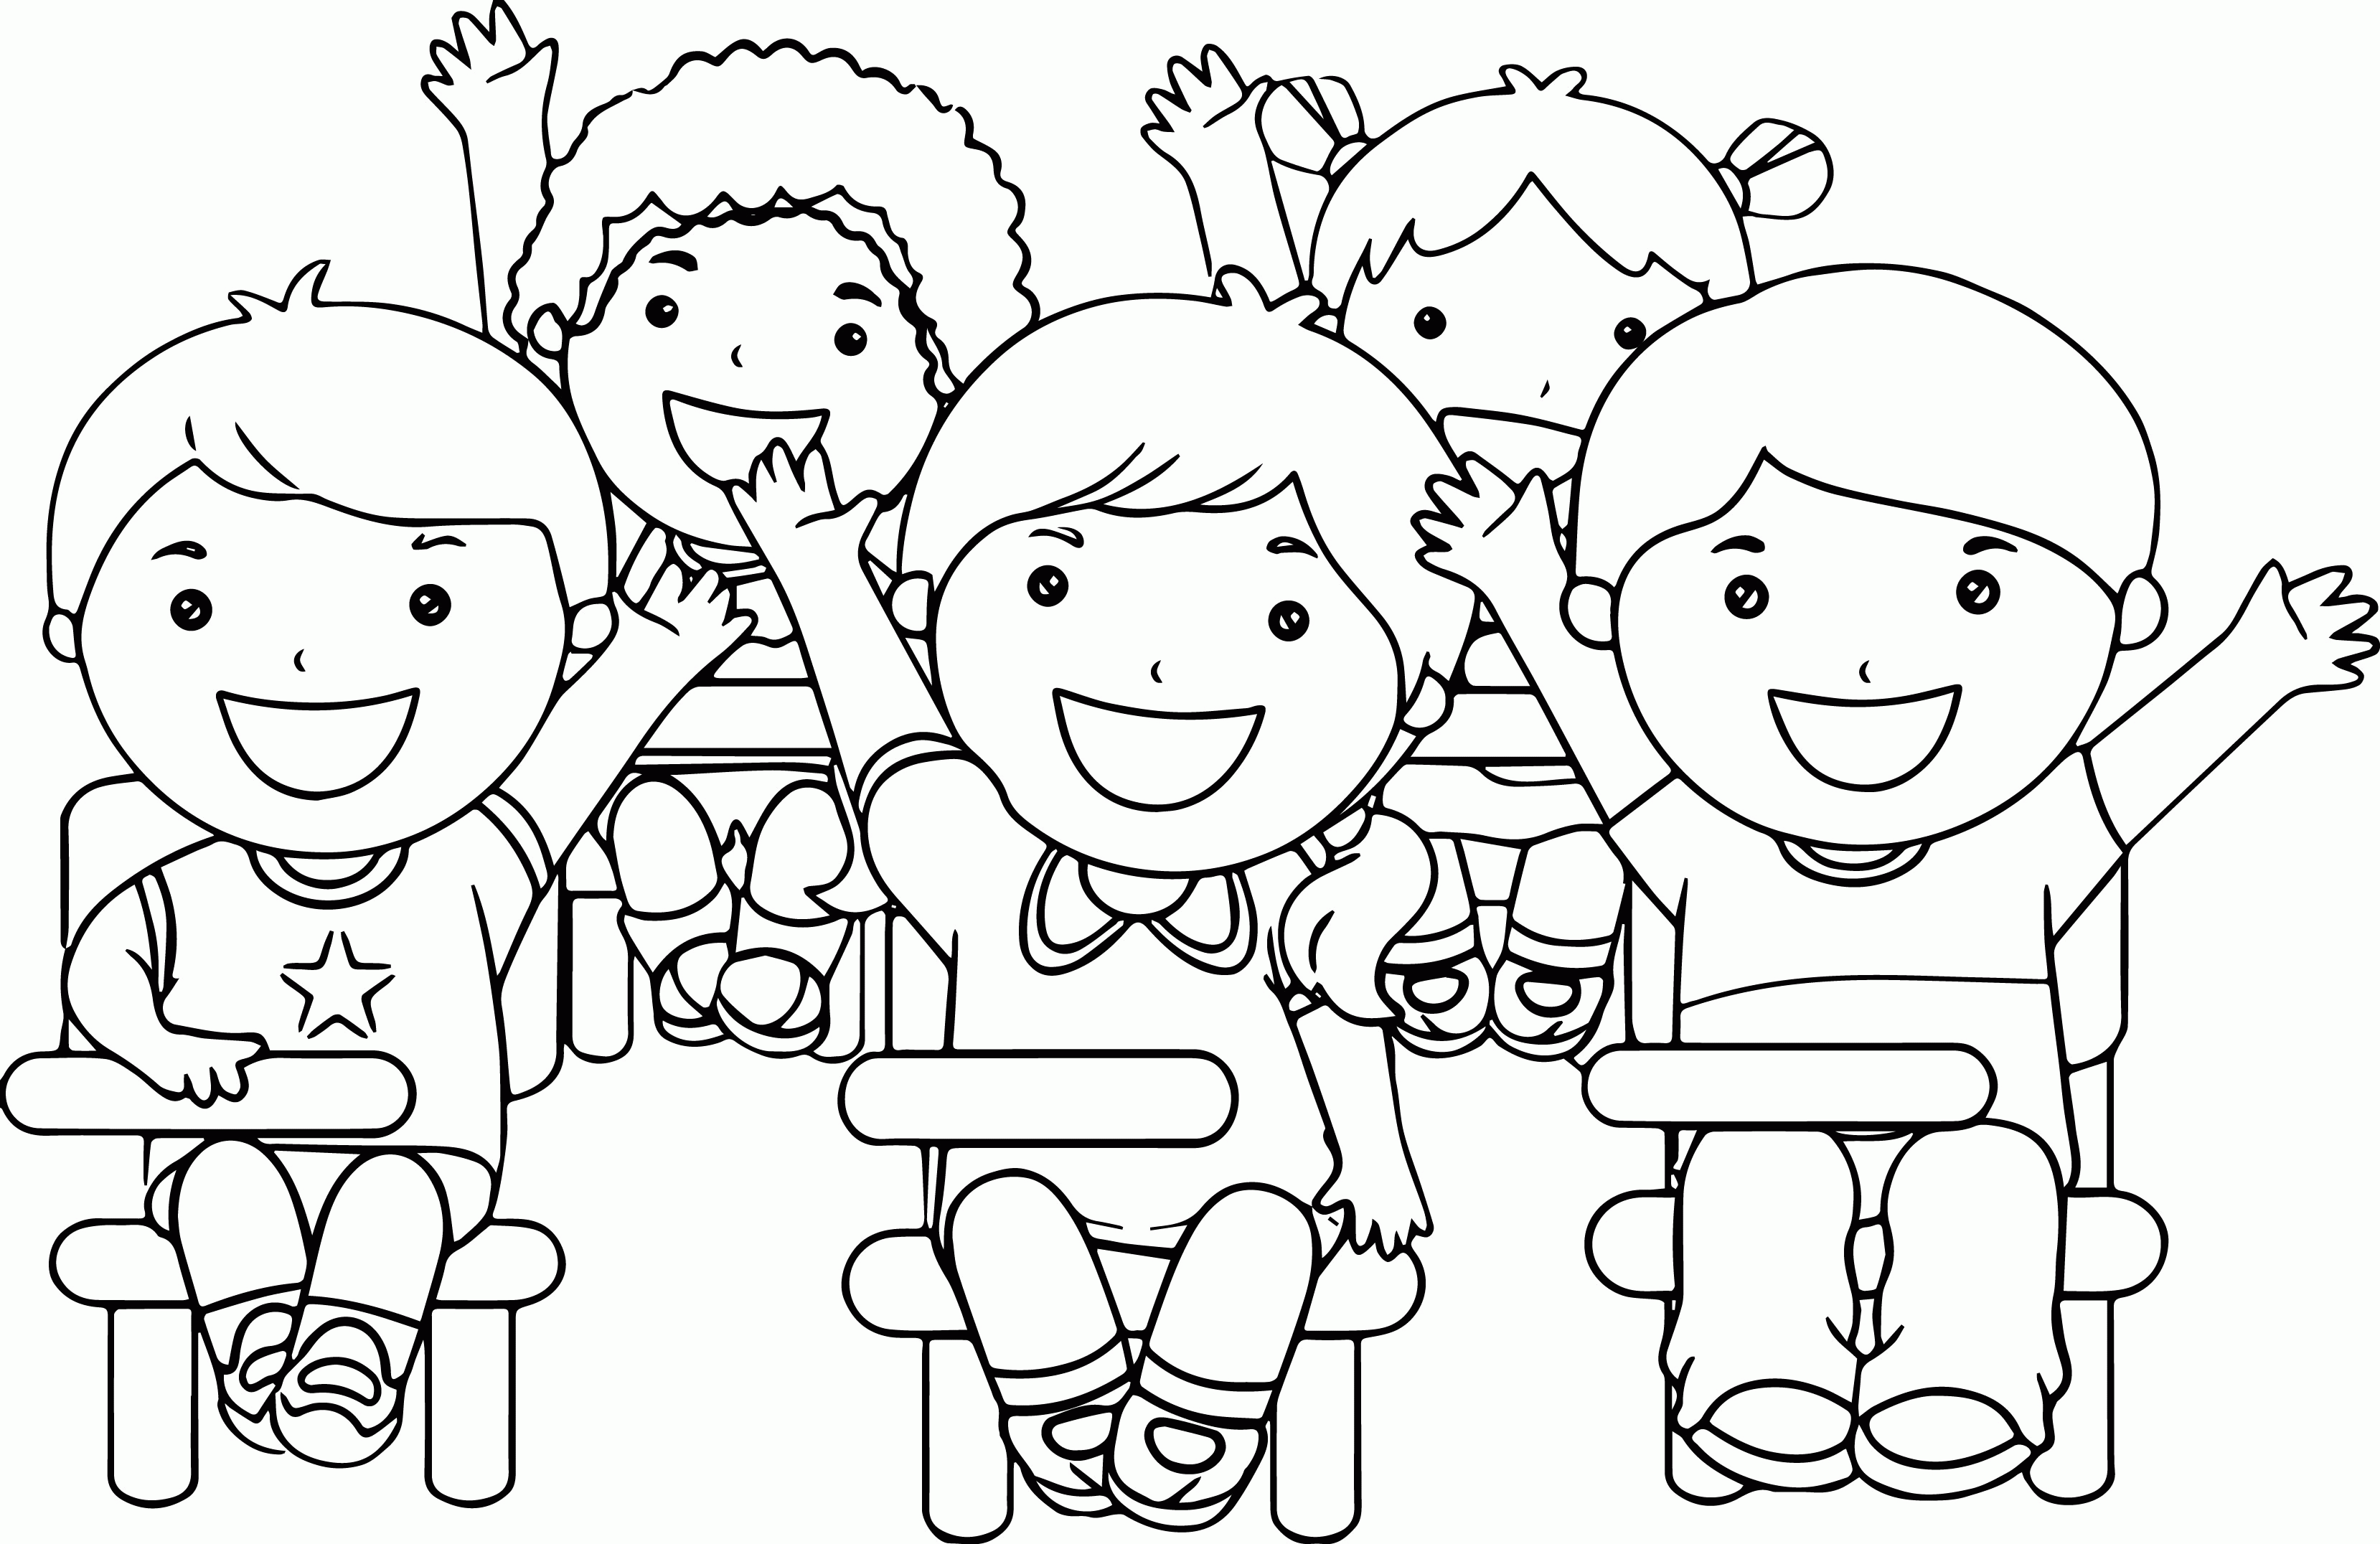 Child At School Coloring Page   Coloring Home